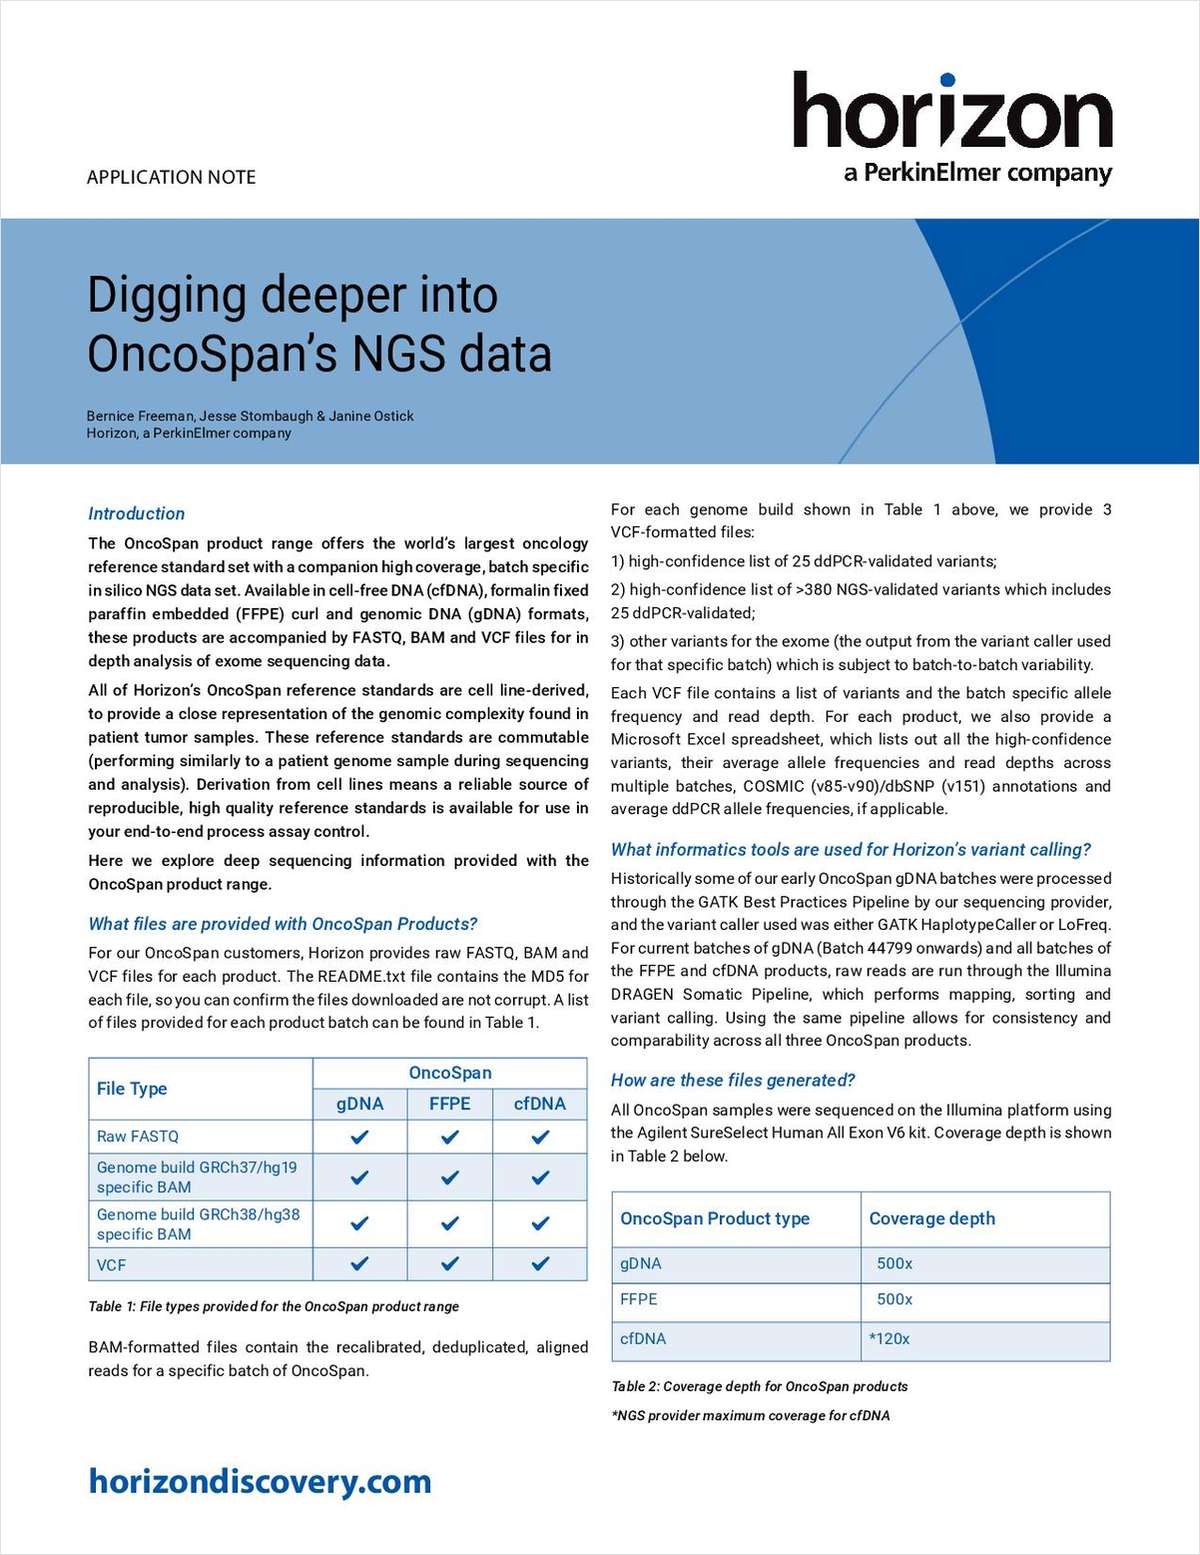 Digging Deeper into OncoSpan's NGS Data